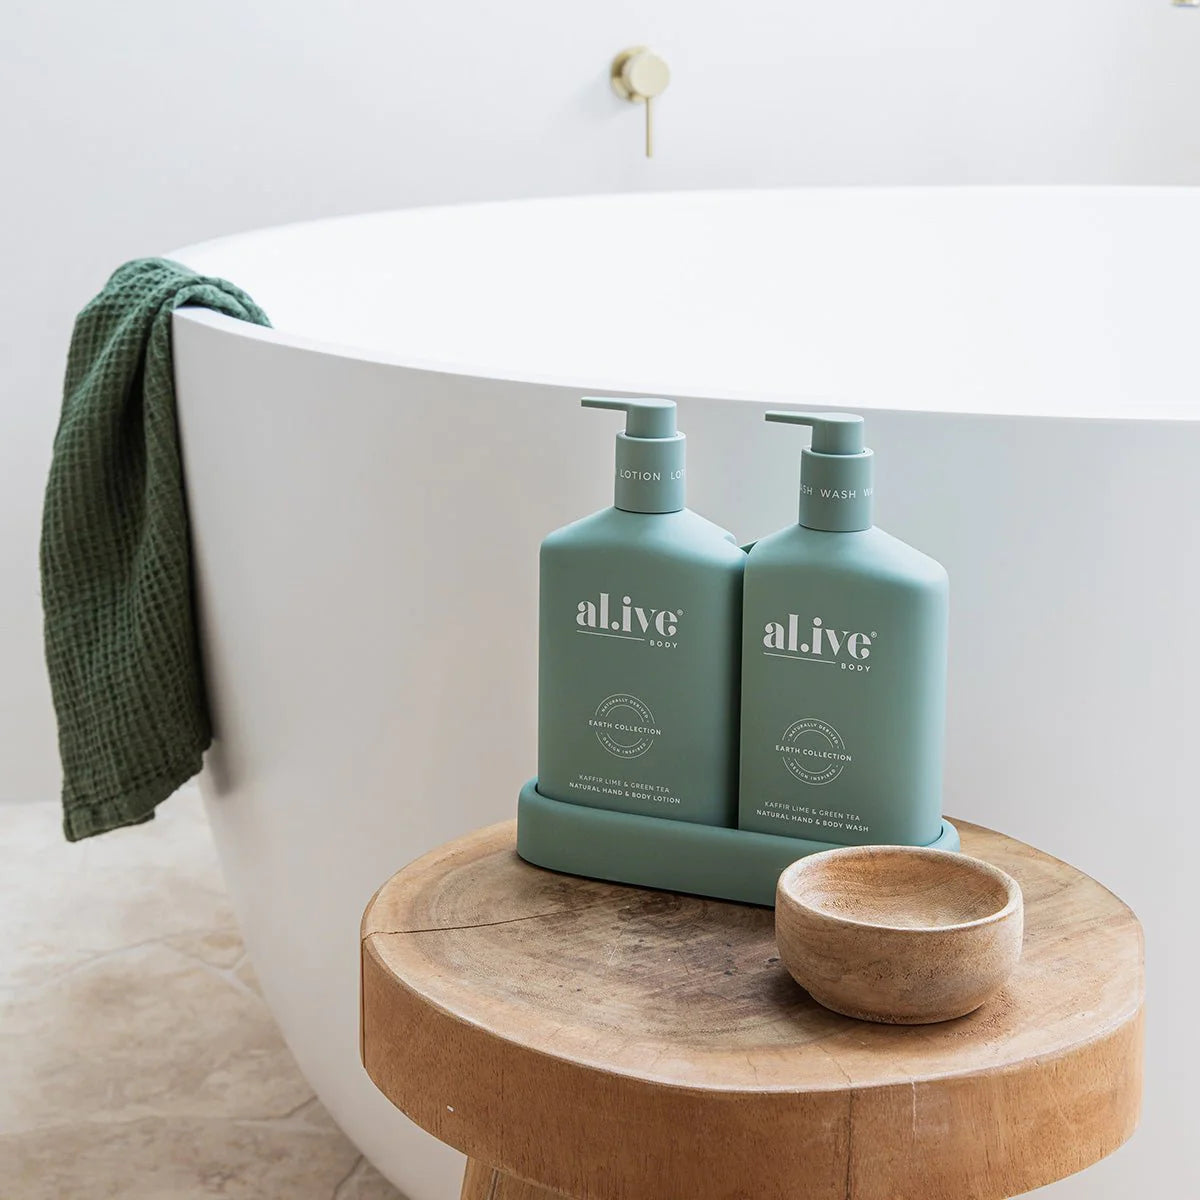 The Kaffir Lime & Green Tea Body Wash/Lotion Duo from al.ive body is an exquisite mix of natural ingredients plus essential oils and native botanical extracts to pamper your skin! Enjoy this beautiful best selling duo in metallic for our Christmas edition